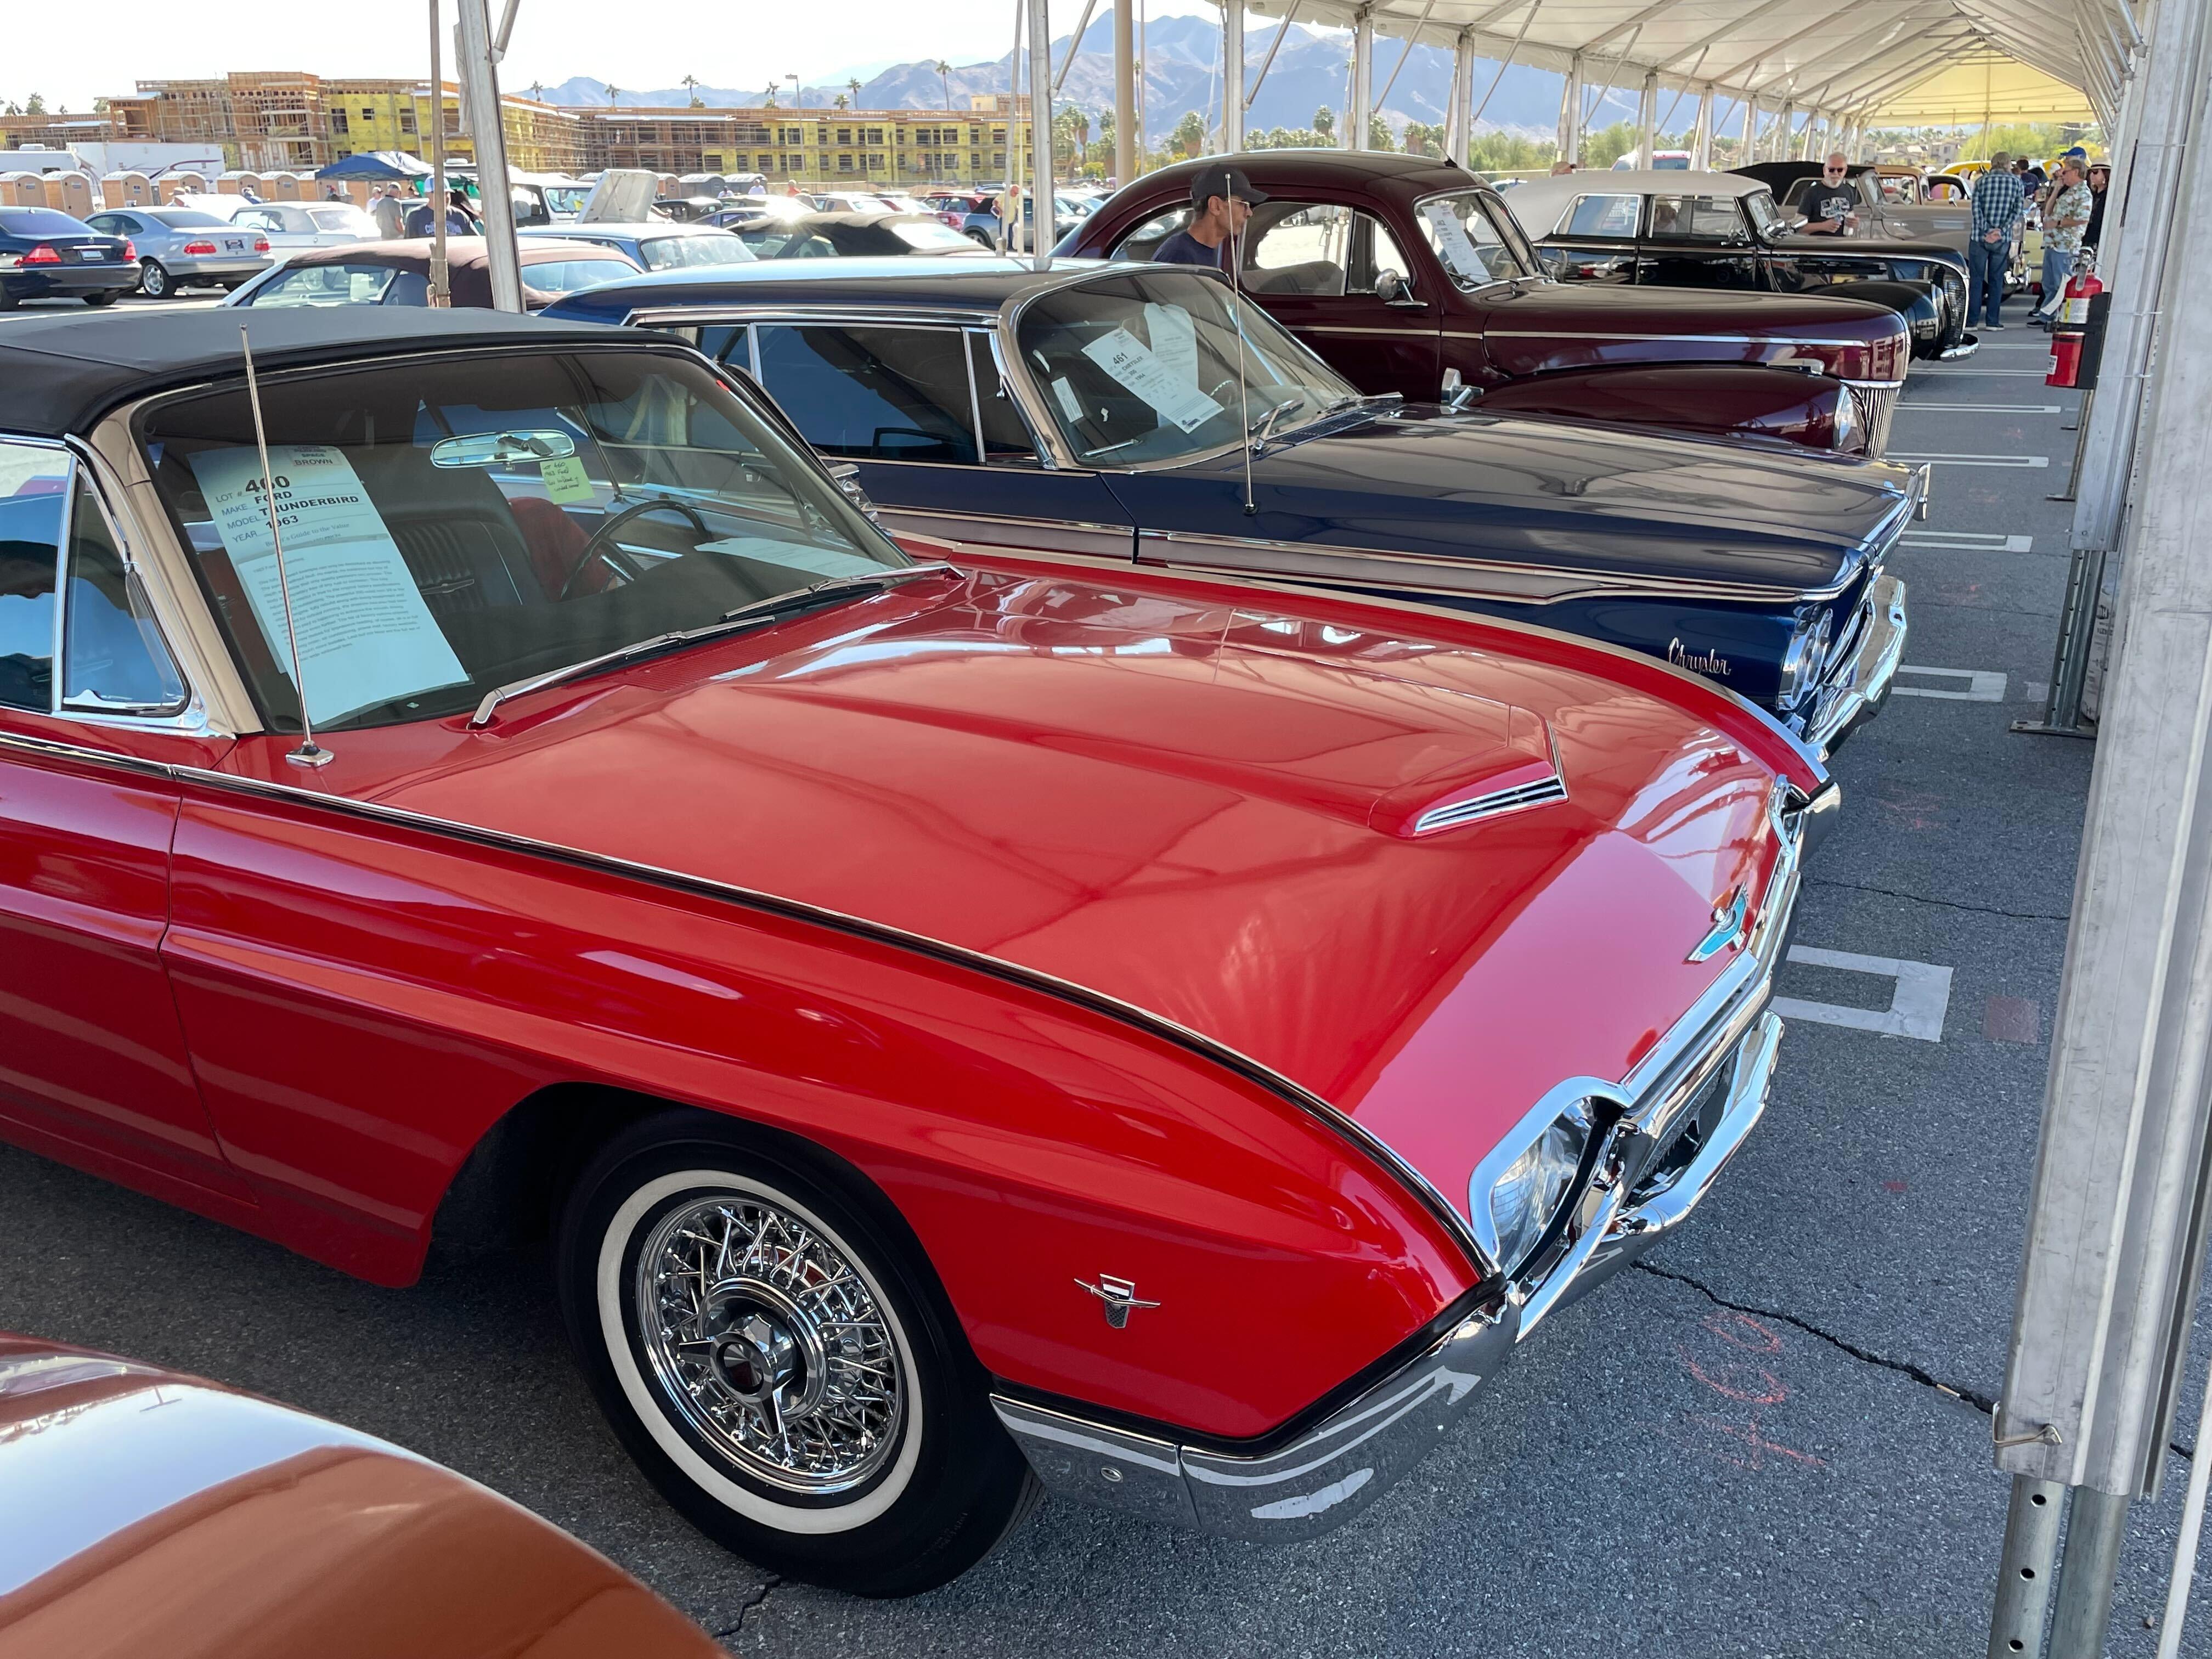 My five favorites from this weekend's McCormick Palm Springs auction